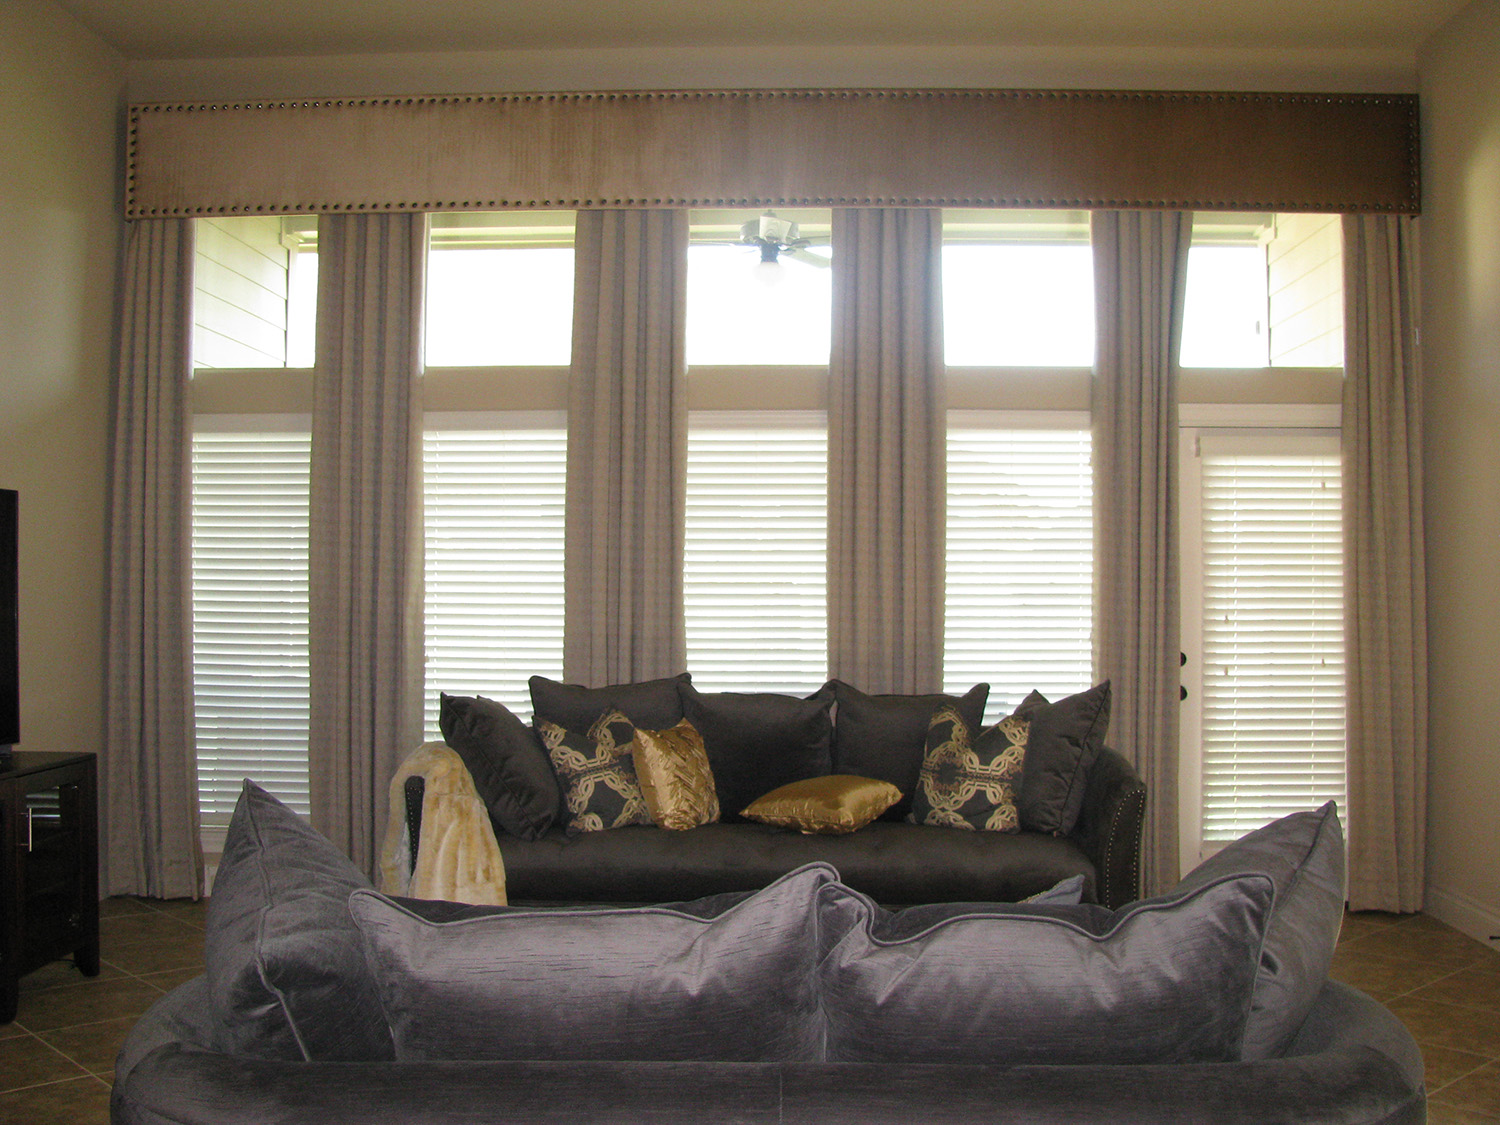 cream drapes with blinds hung on window with silver couch